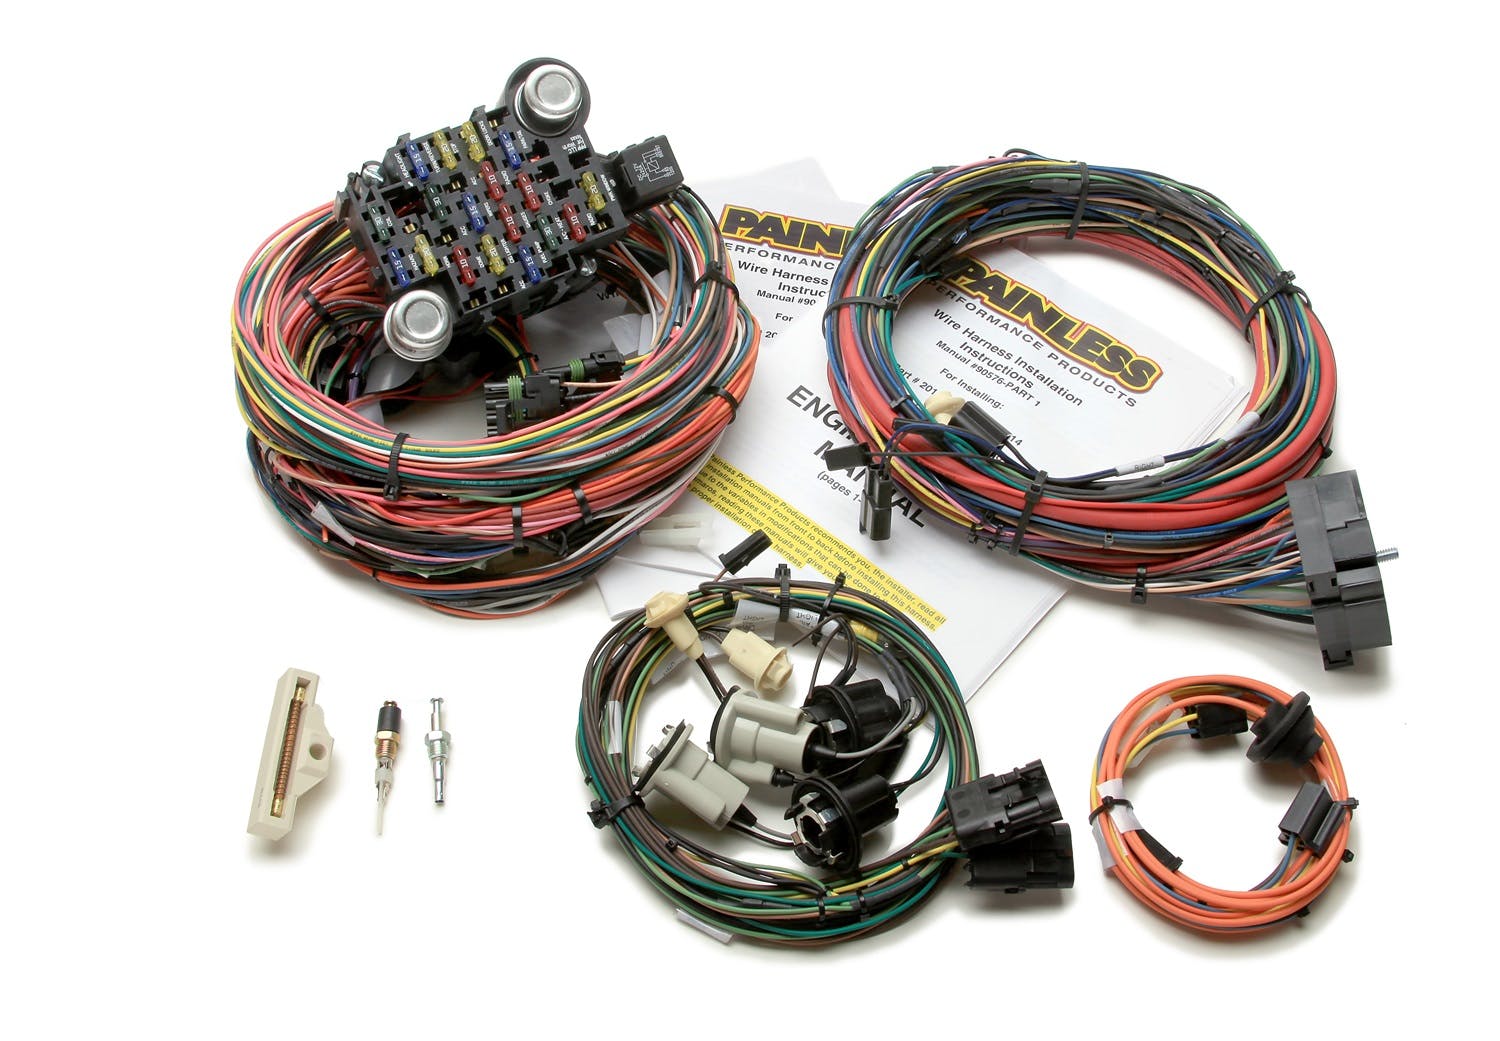 Painless 20112 26-Circuit Wiring Harness